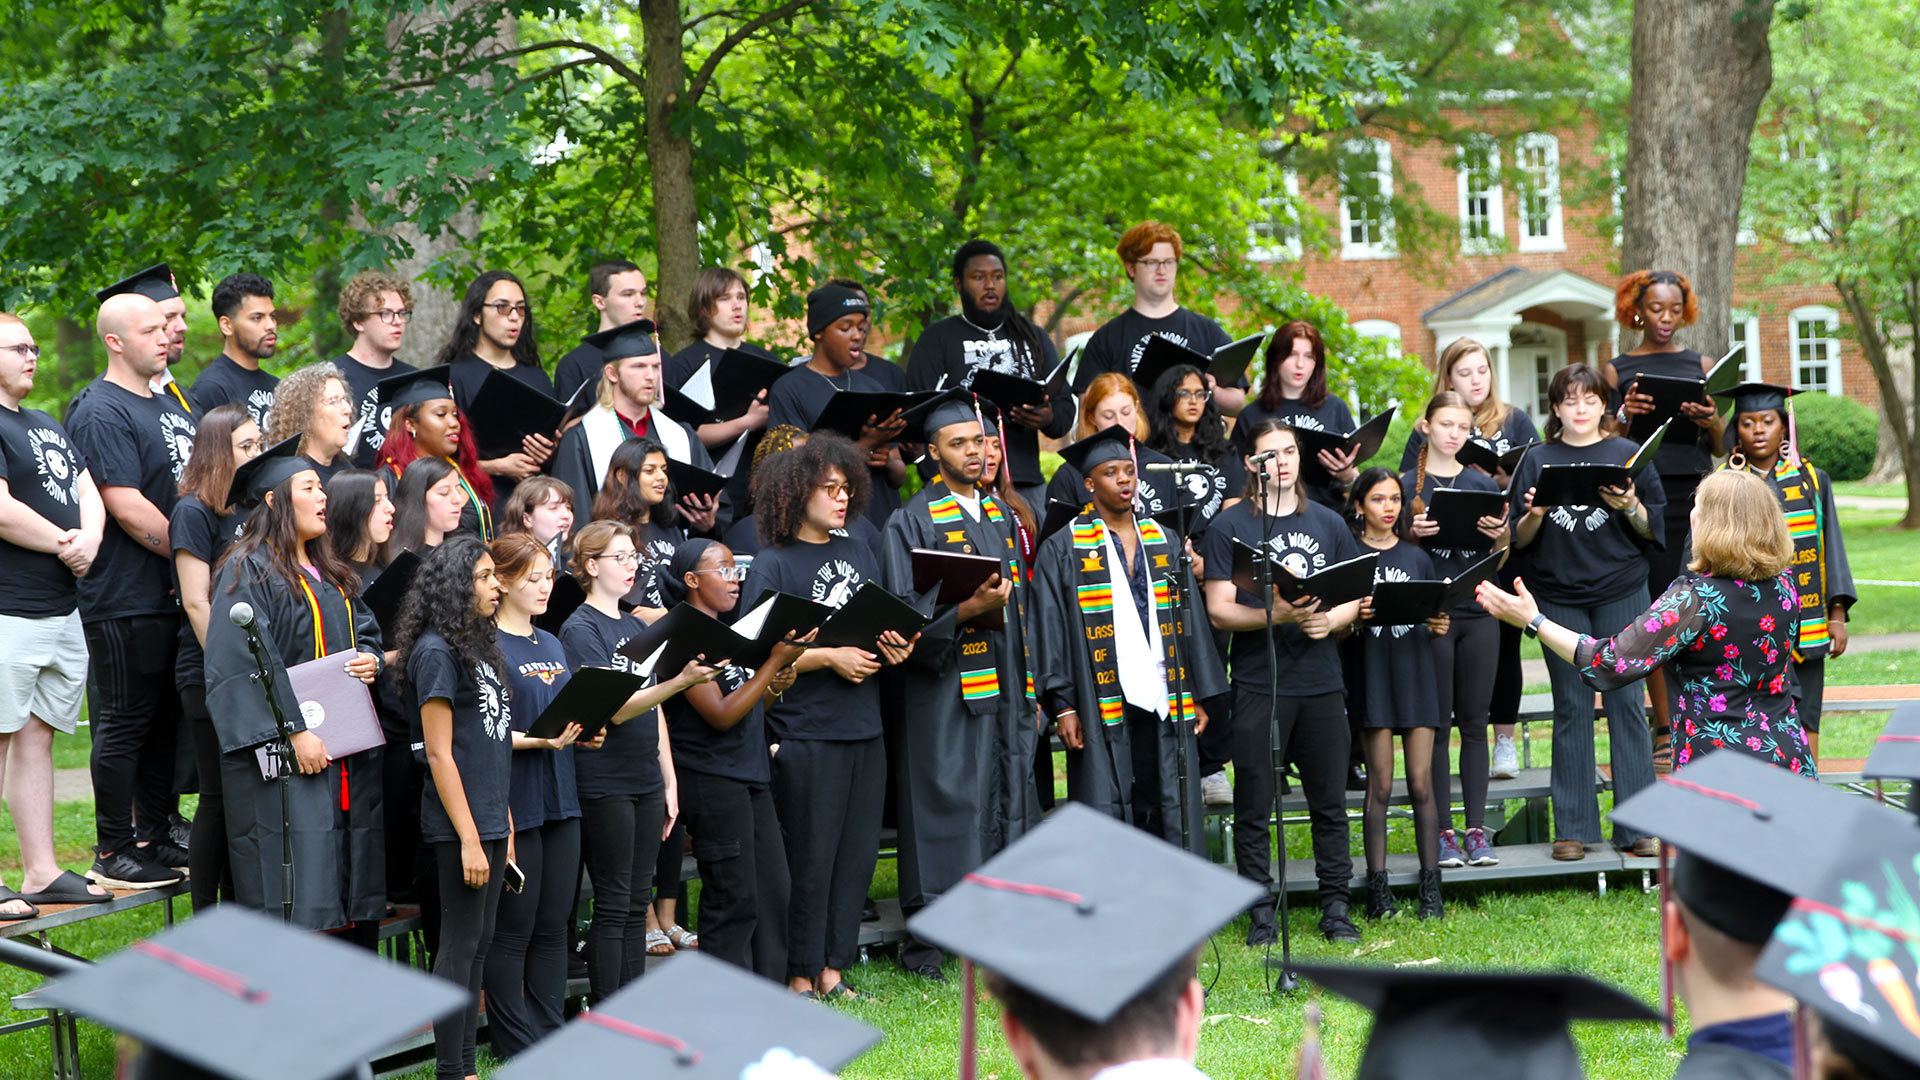 The Guilford College Choir - including Graduates and Alums - sings the Alma Mater